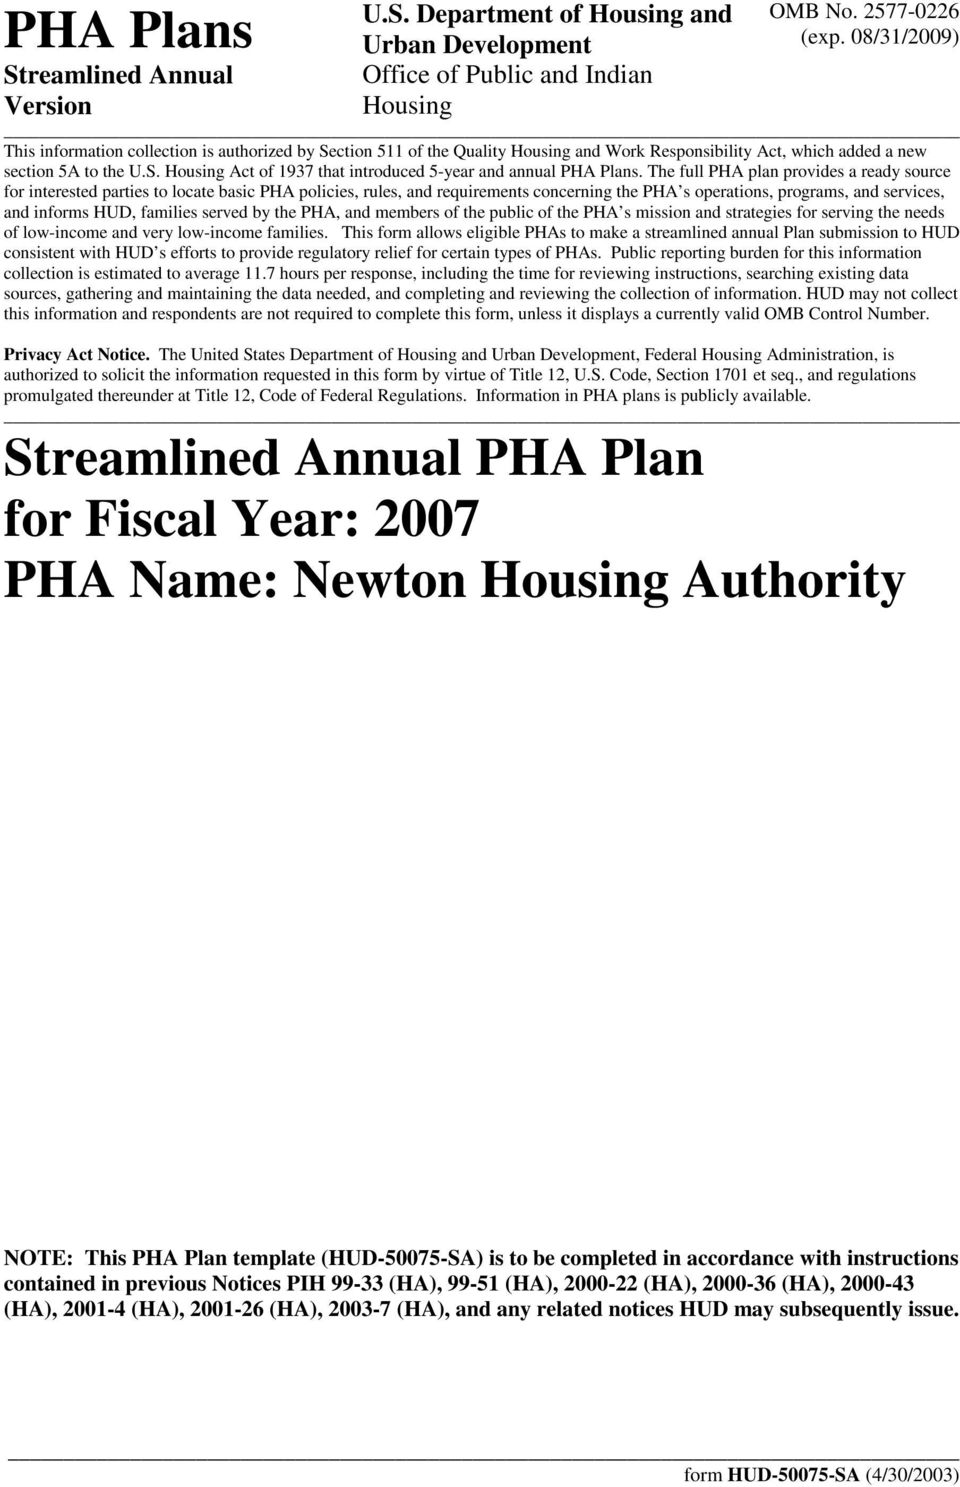 The full PHA plan provides a ready source for interested parties to locate basic PHA policies, rules, and requirements concerning the PHA s operations, programs, and services, and informs HUD,